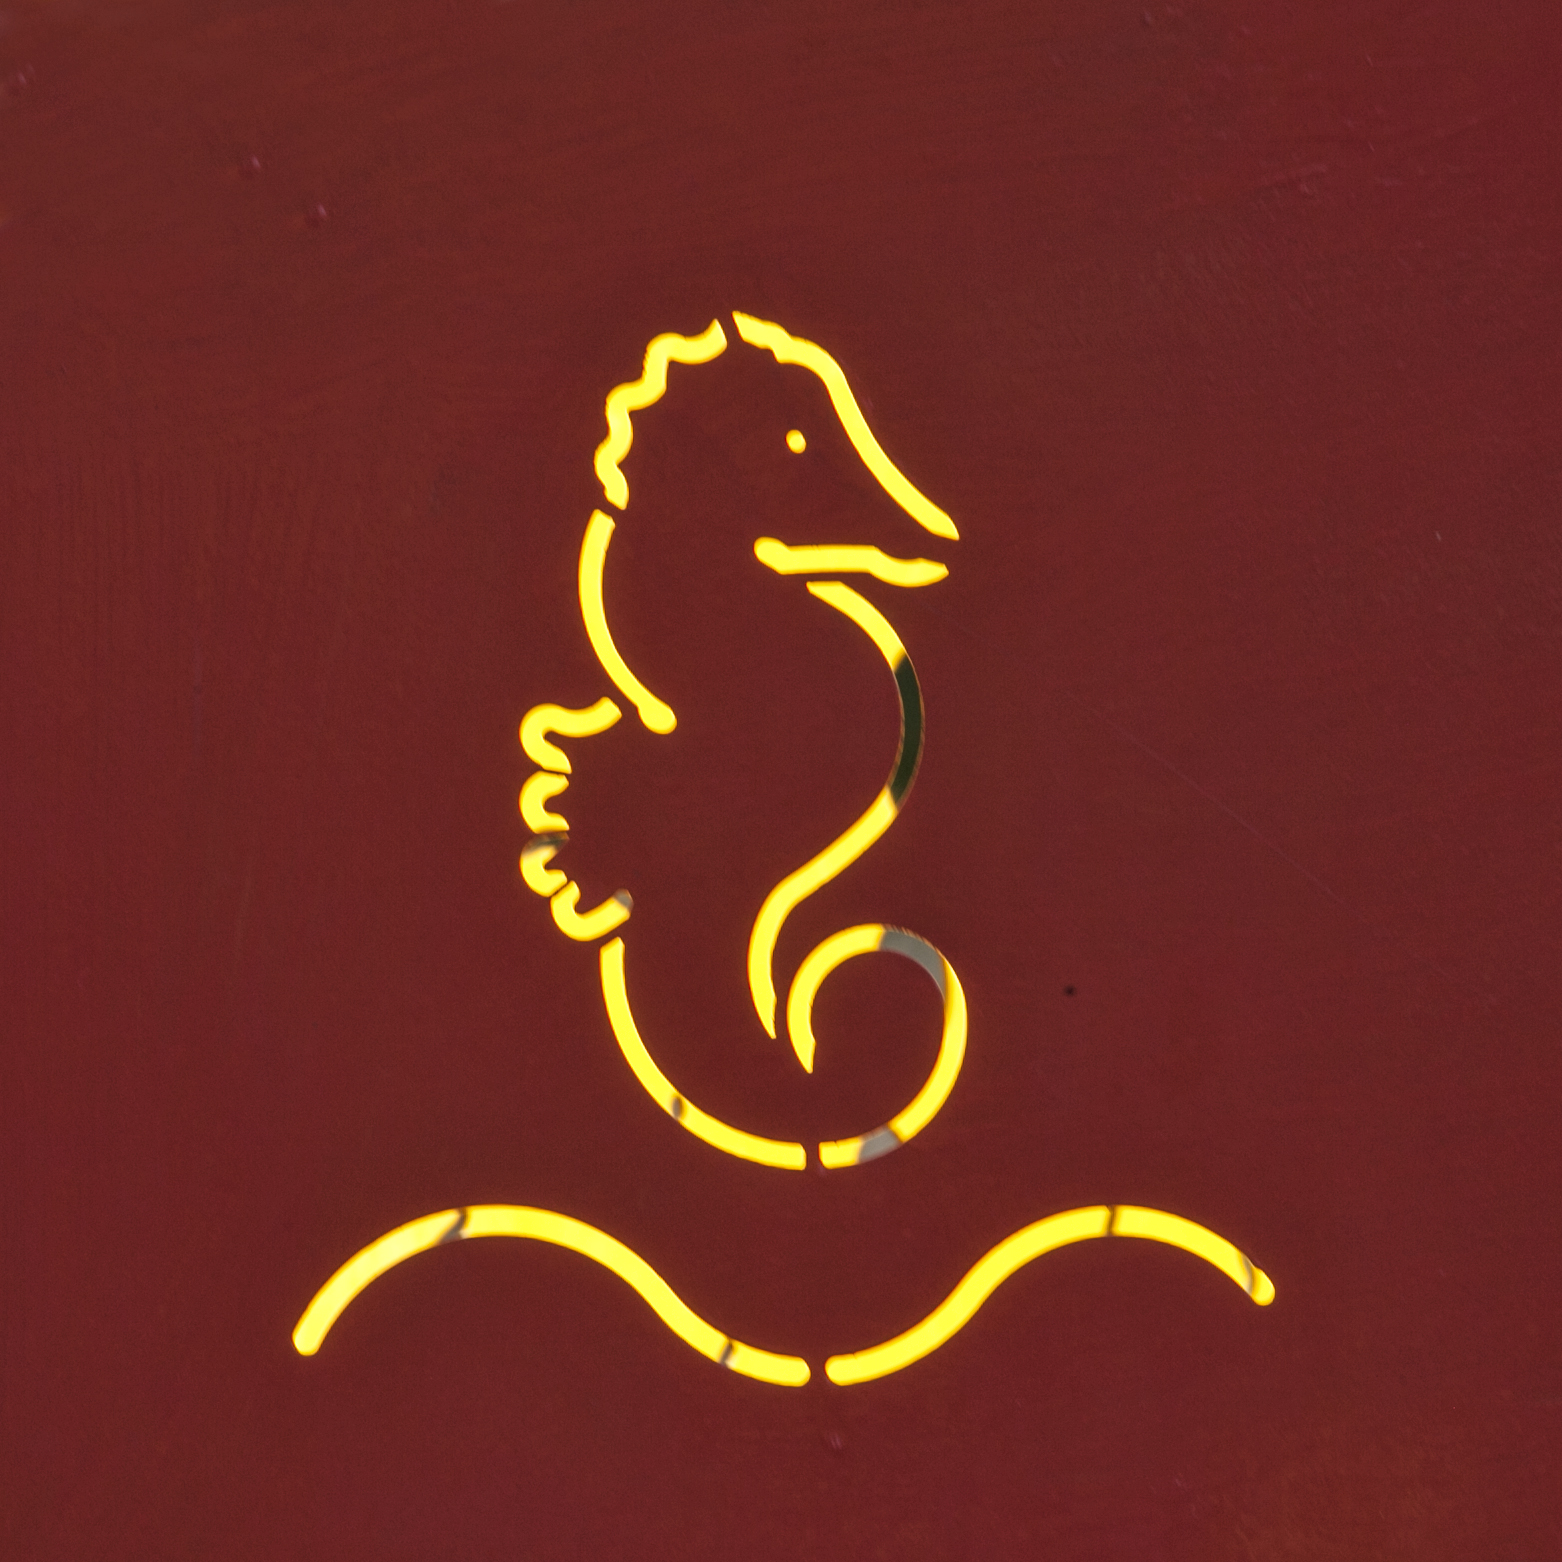 yellow neon seahorse sign on red surface